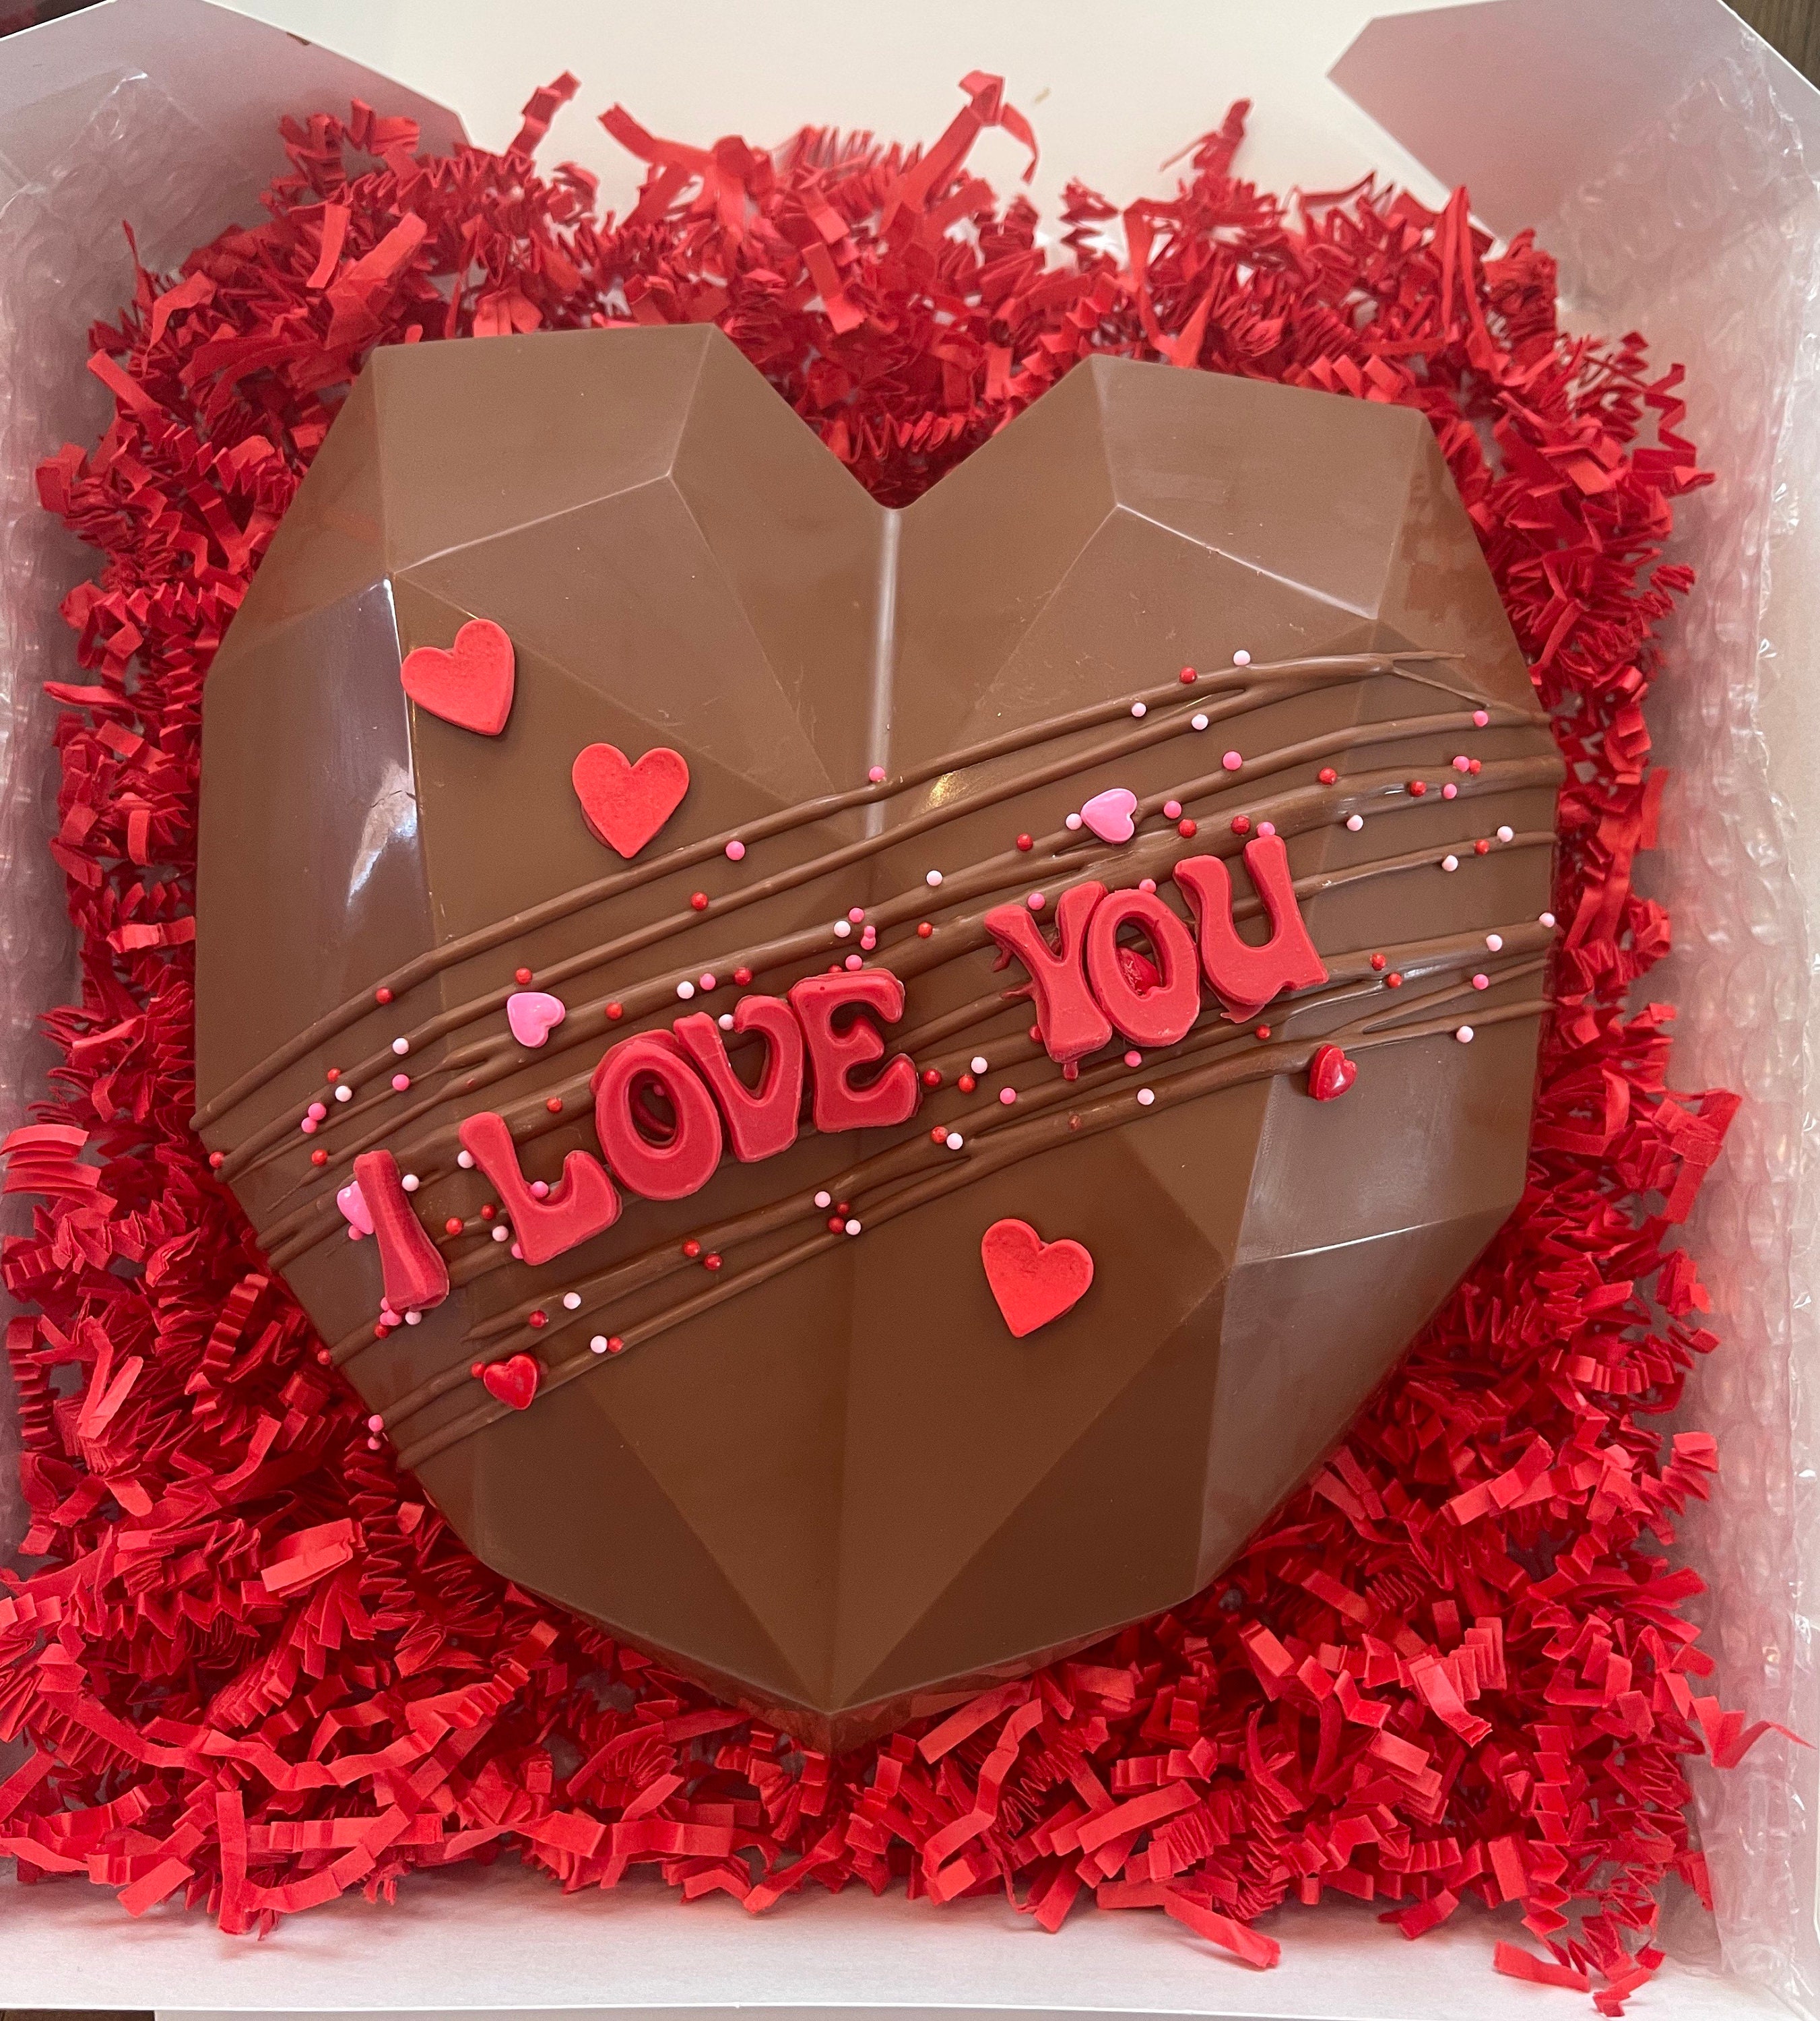 Breakable Heart Mold  Smashable Heart Chocolate Mold for Valentine's Day -  Sweets & Treats™